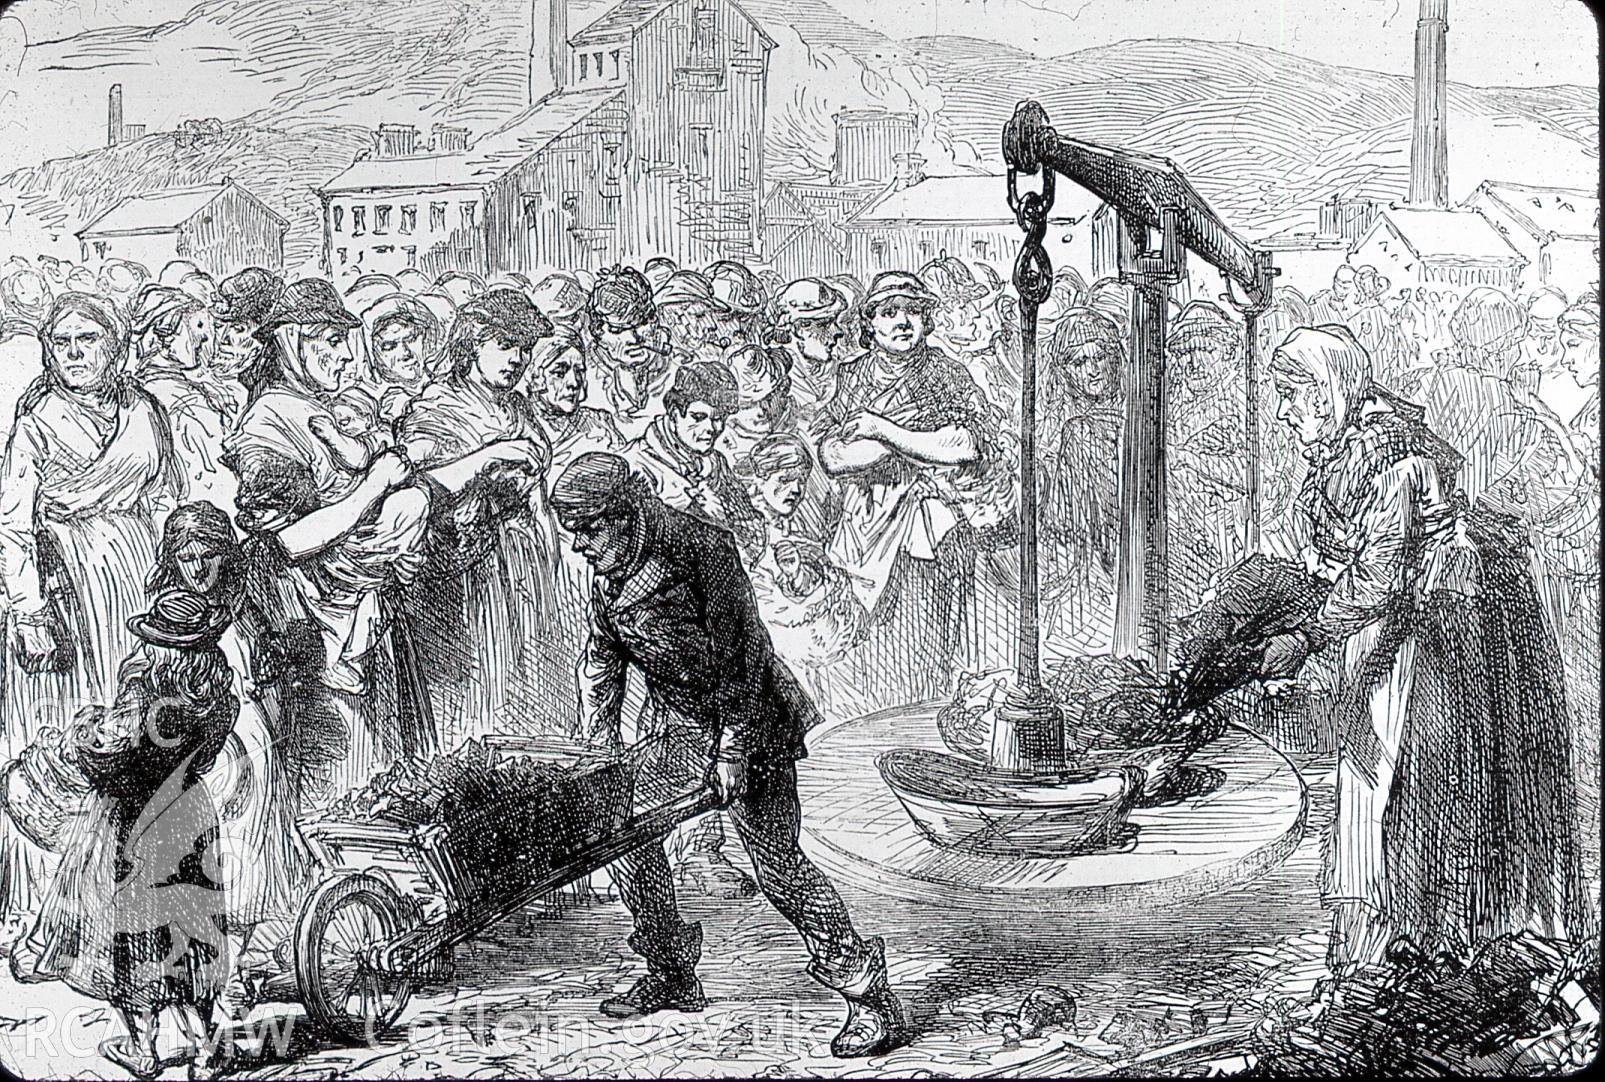 Digital copy of etching from London Illustrated News entitled: 'Strike in South Wales: Local Families at Merthyr with Their Portion Worth of Coal', dated 1873.